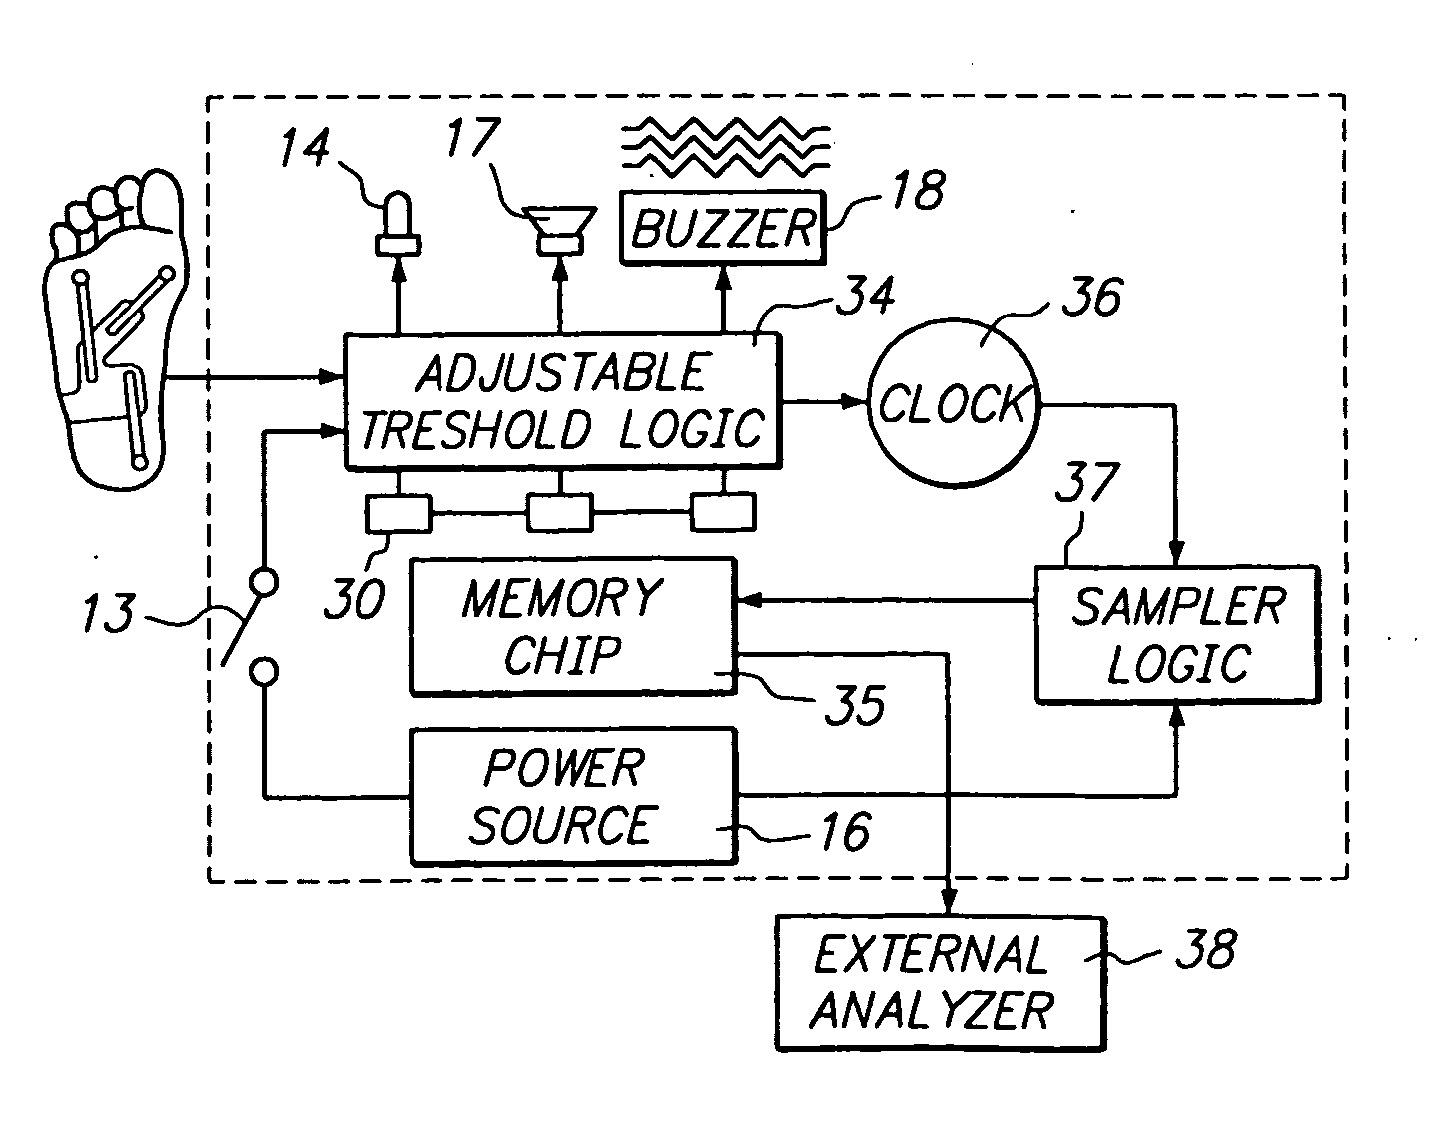 Sensor and analyzer for determining physiological limitations